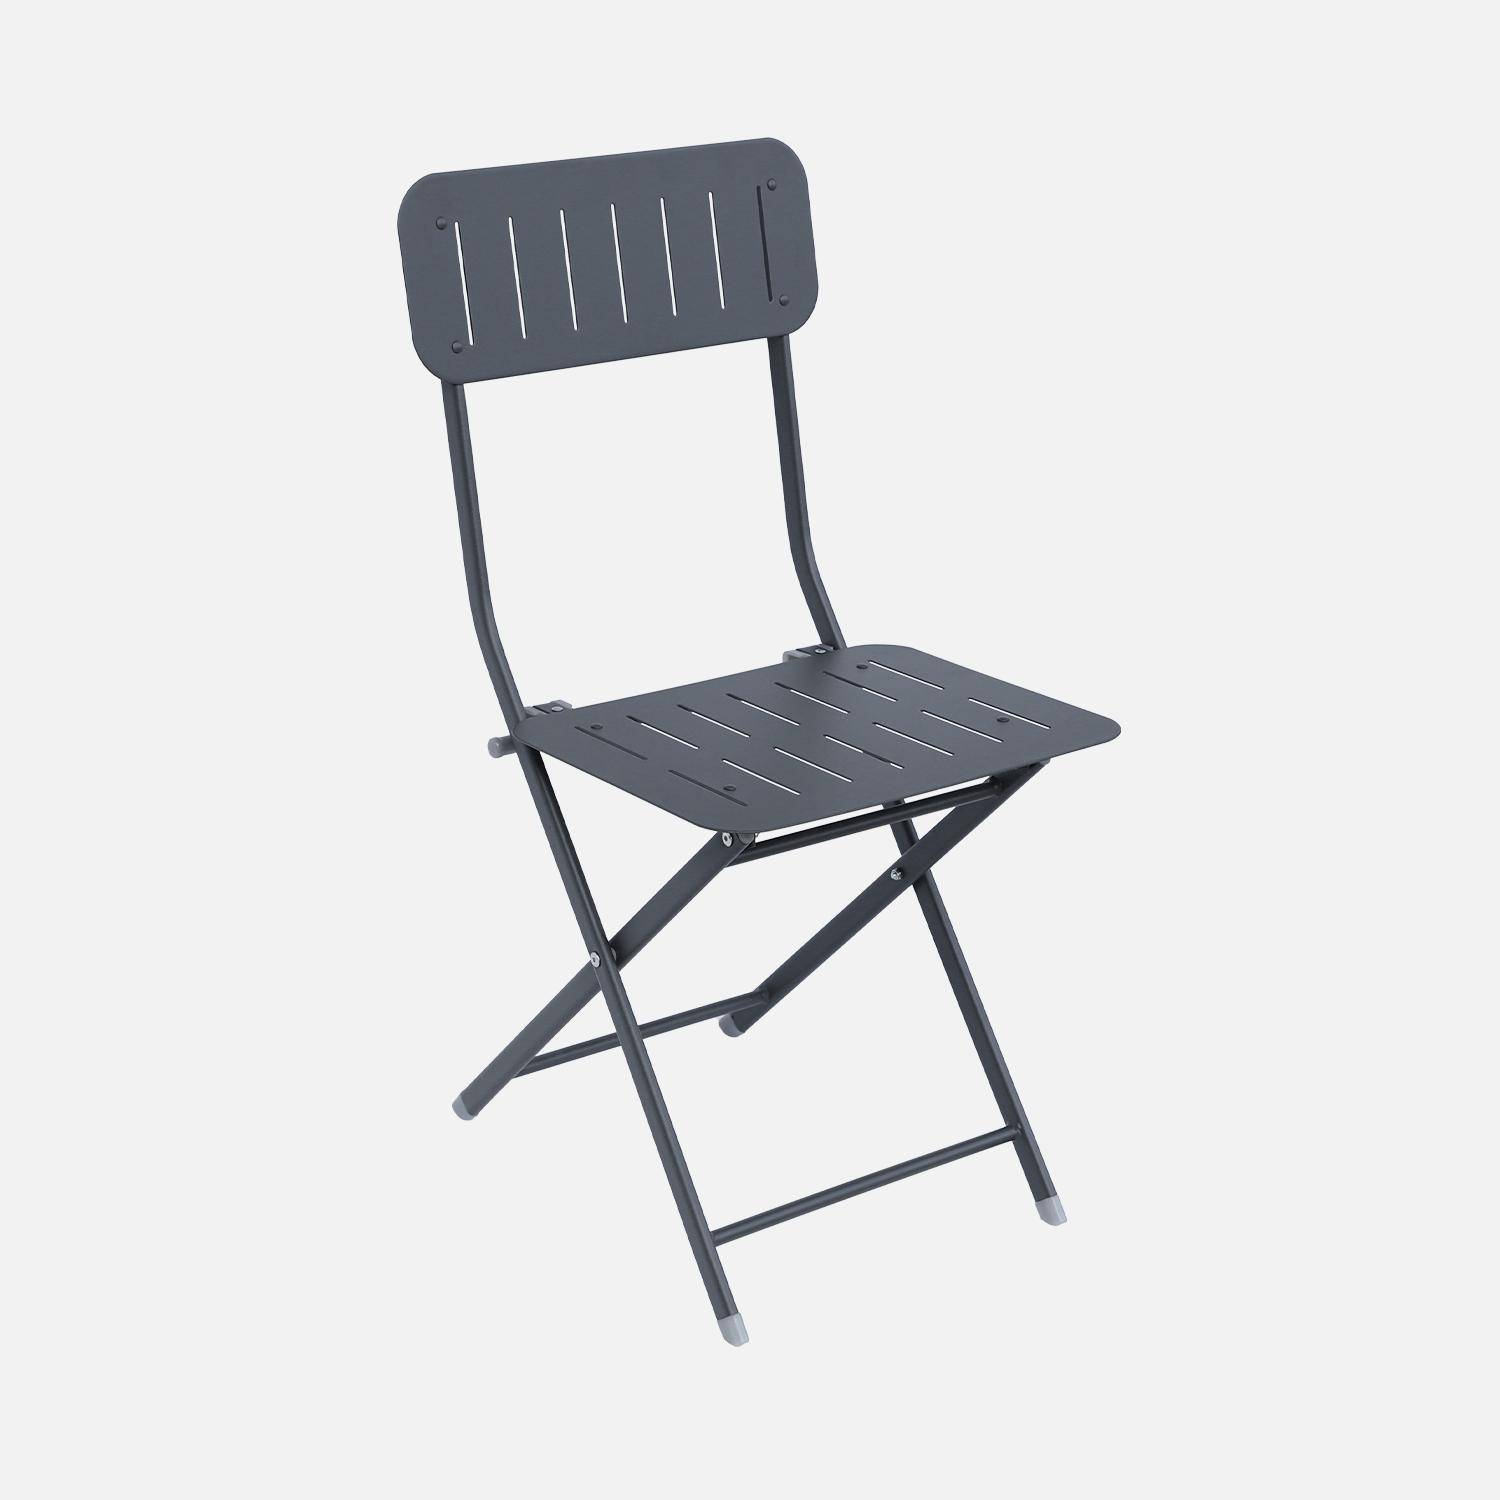 Folding bistro-style garden table in anthracite with 2 folding chairs in sturdy galvanised steel Photo5